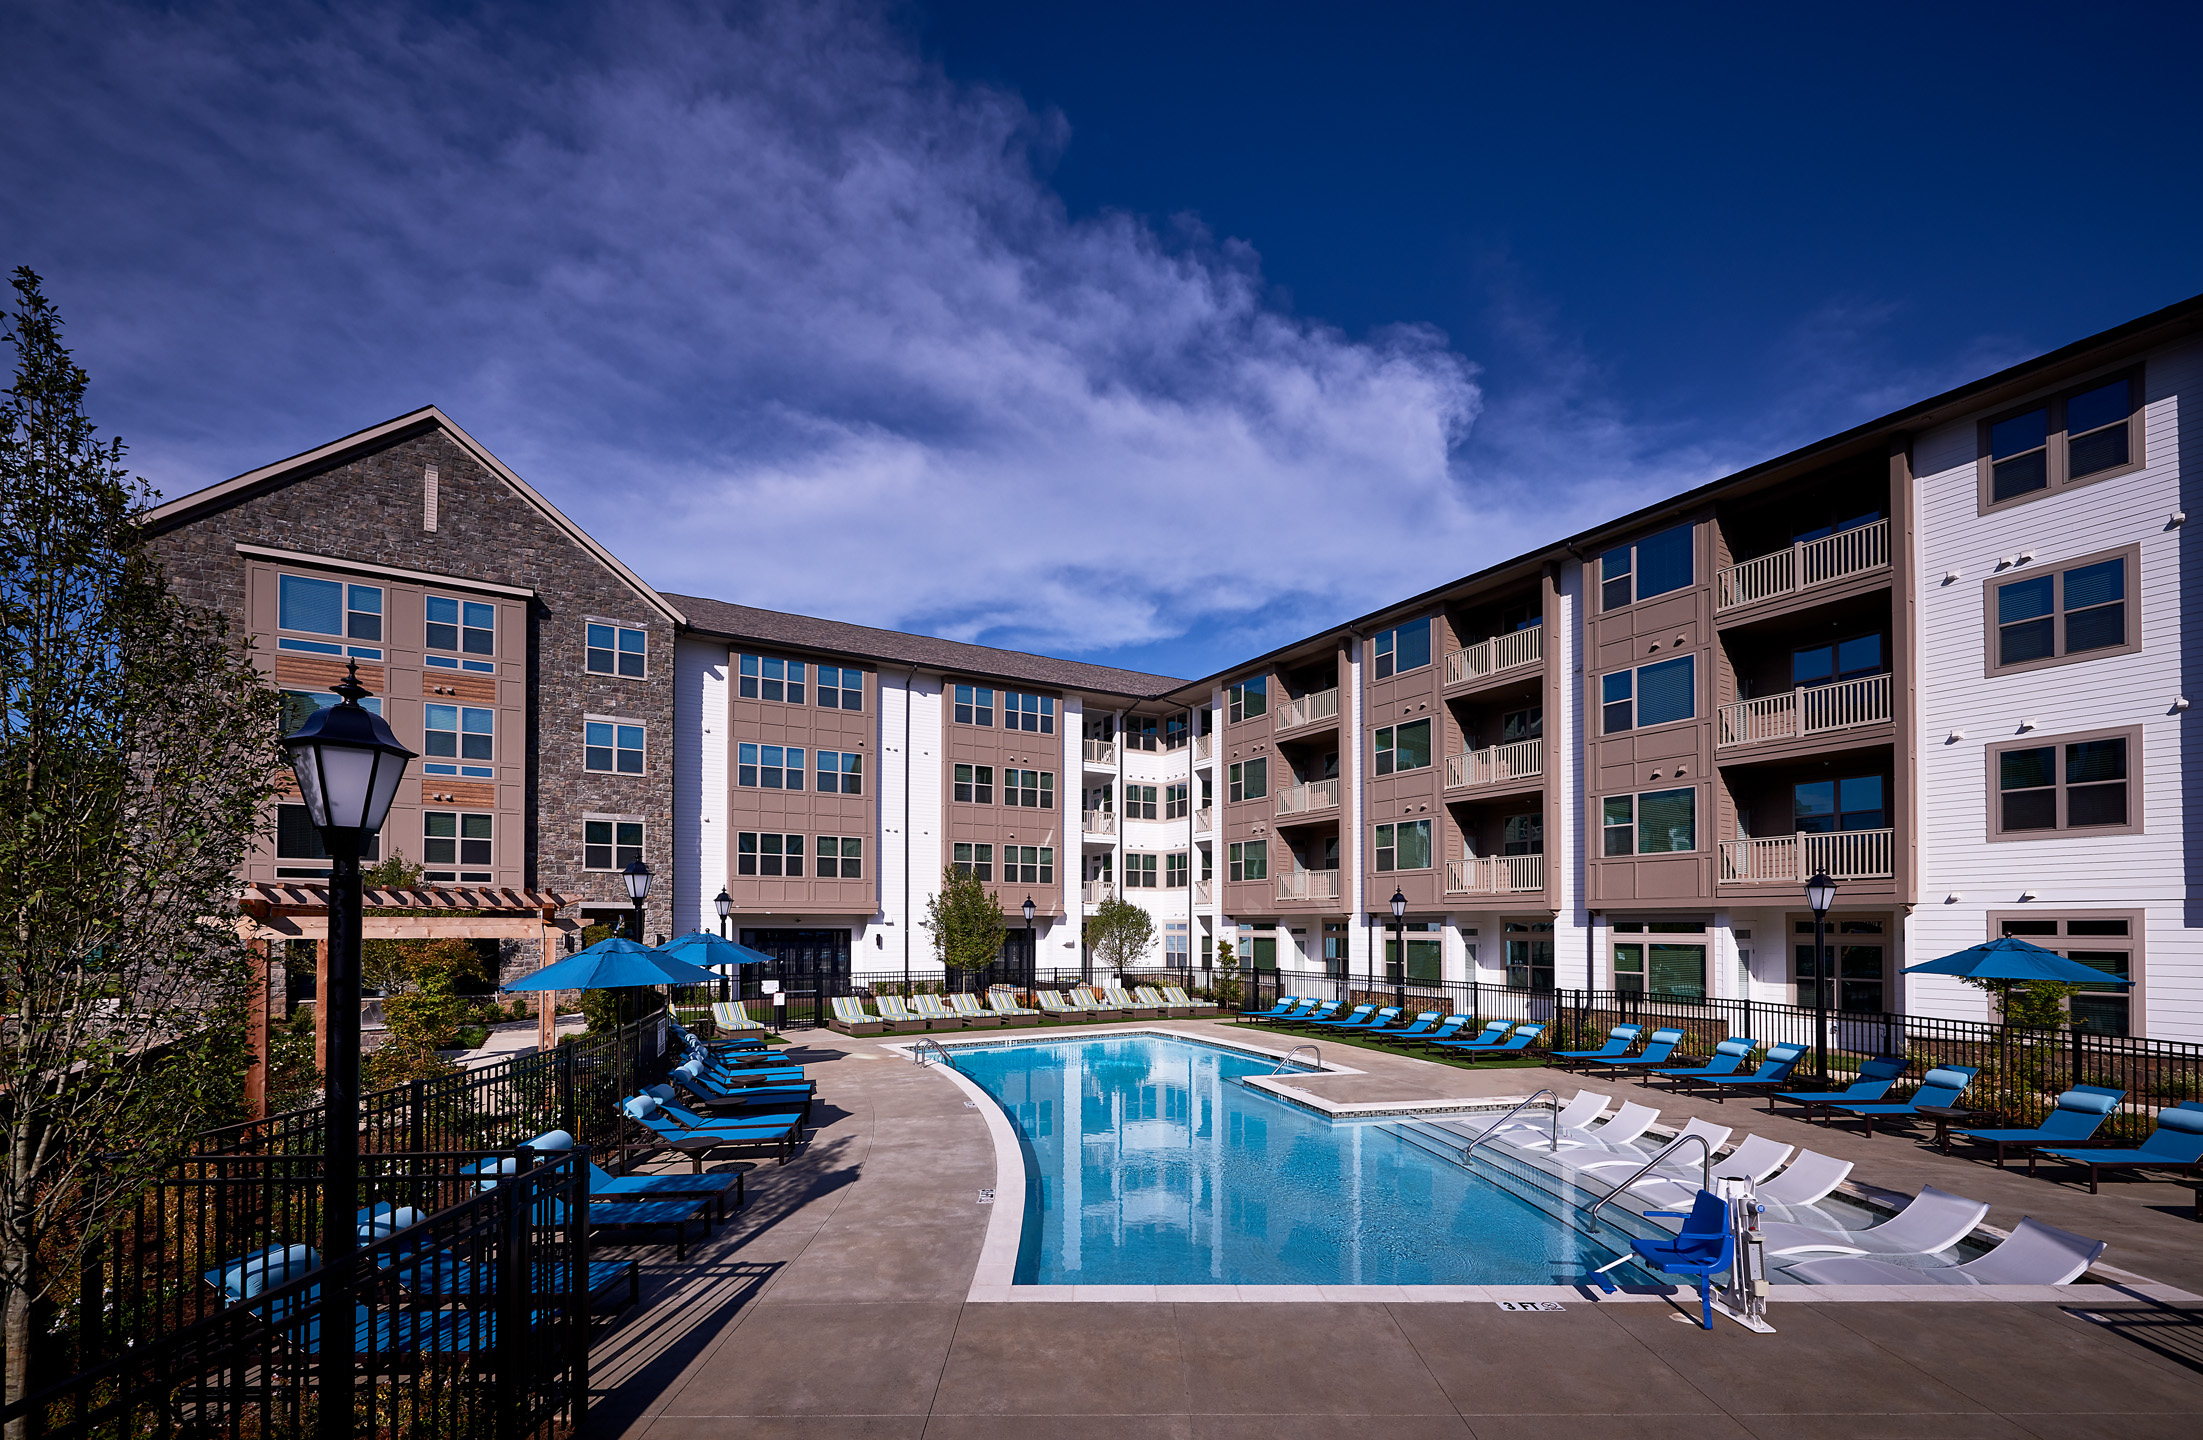 RK Properties Buys Newly Constructed Apartment Community in Charlotte, North Carolina